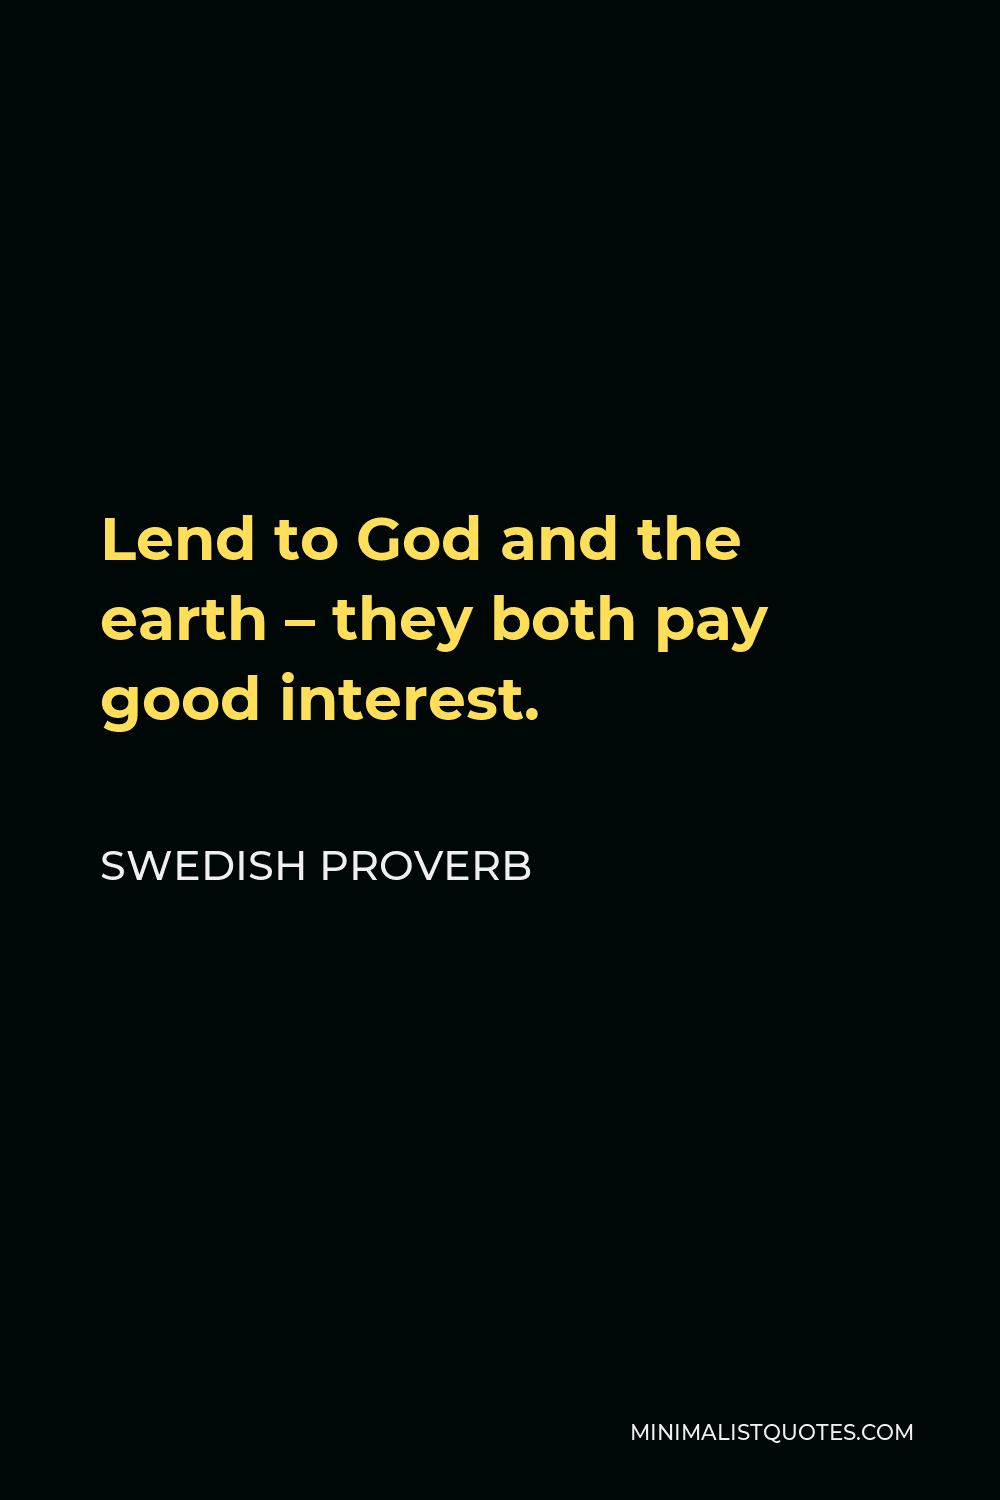 Swedish Proverb Quote - Lend to God and the earth – they both pay good interest.